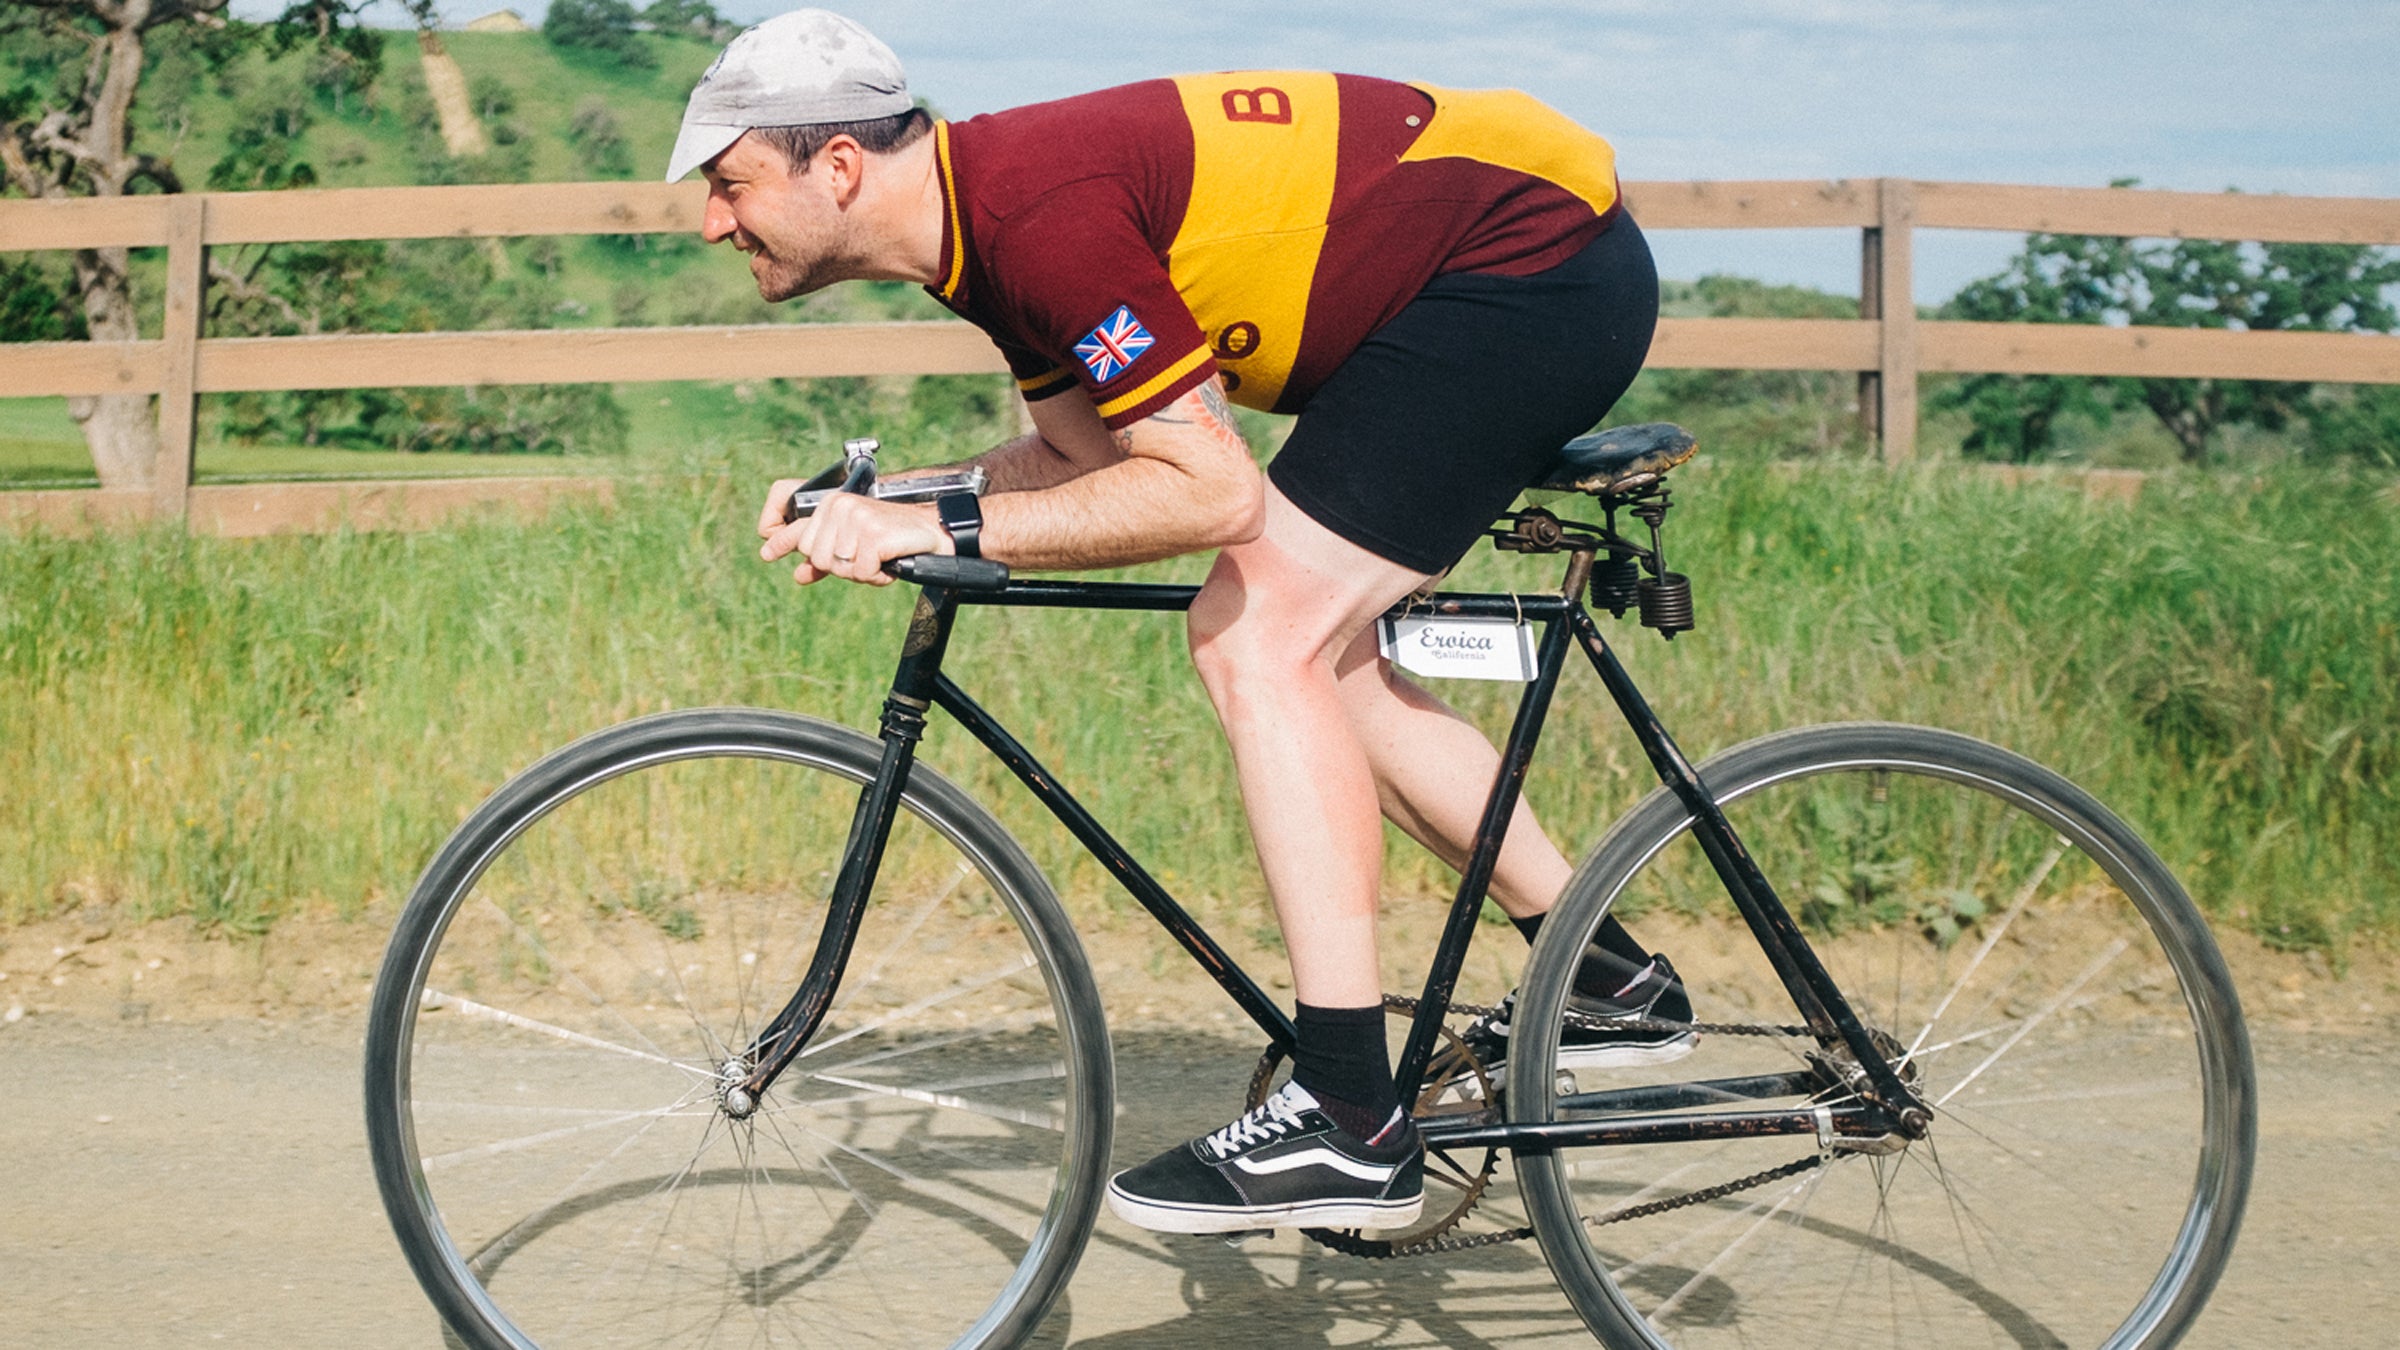 Riding 100 Miles* on a 102-Year-Old Bike